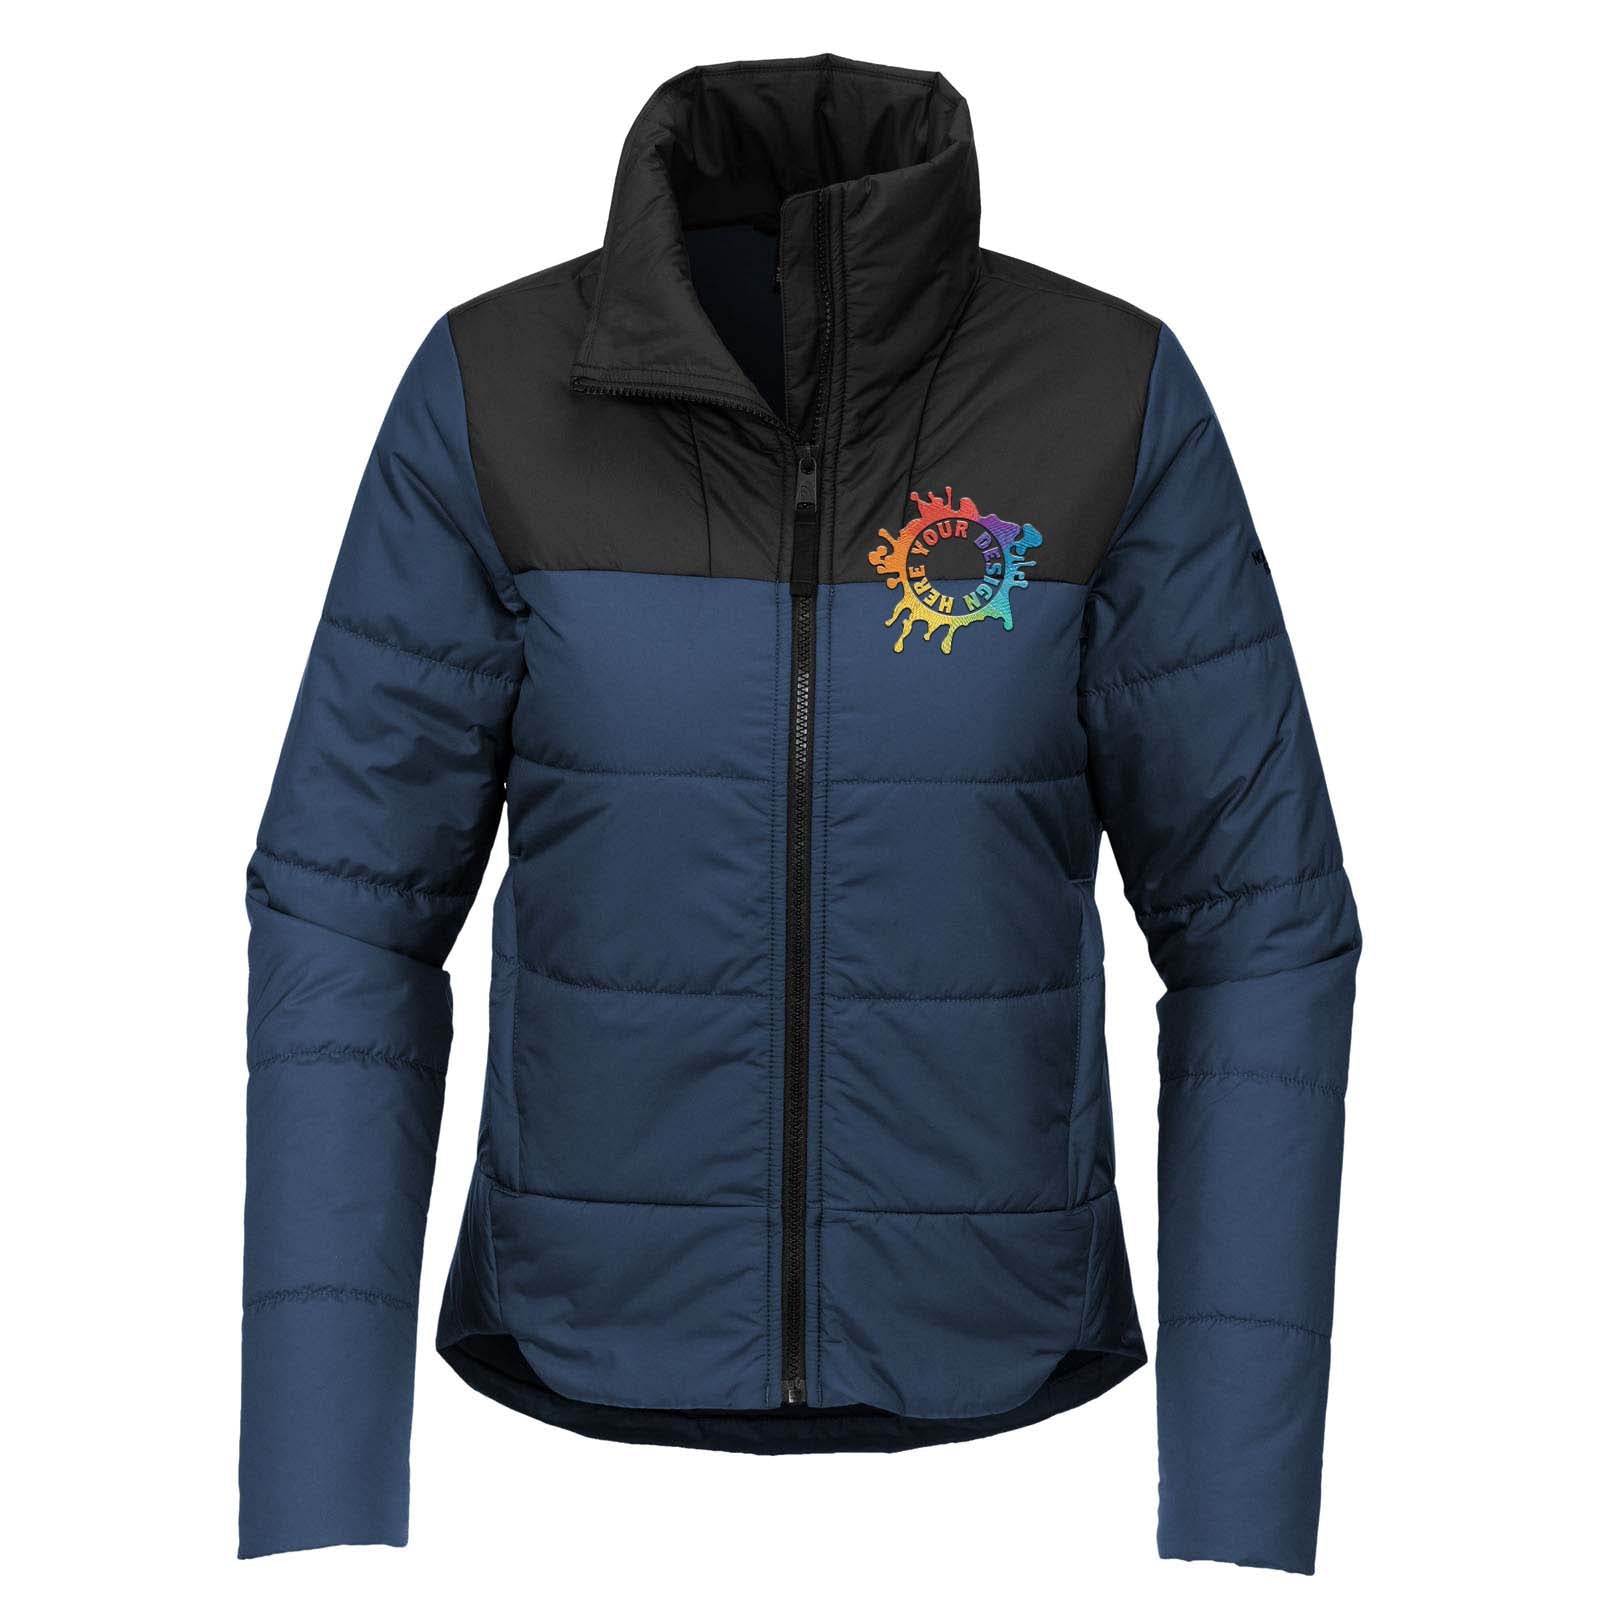 The North Face® Ladies Everyday Insulated Jacket Embroidery - Mato & Hash